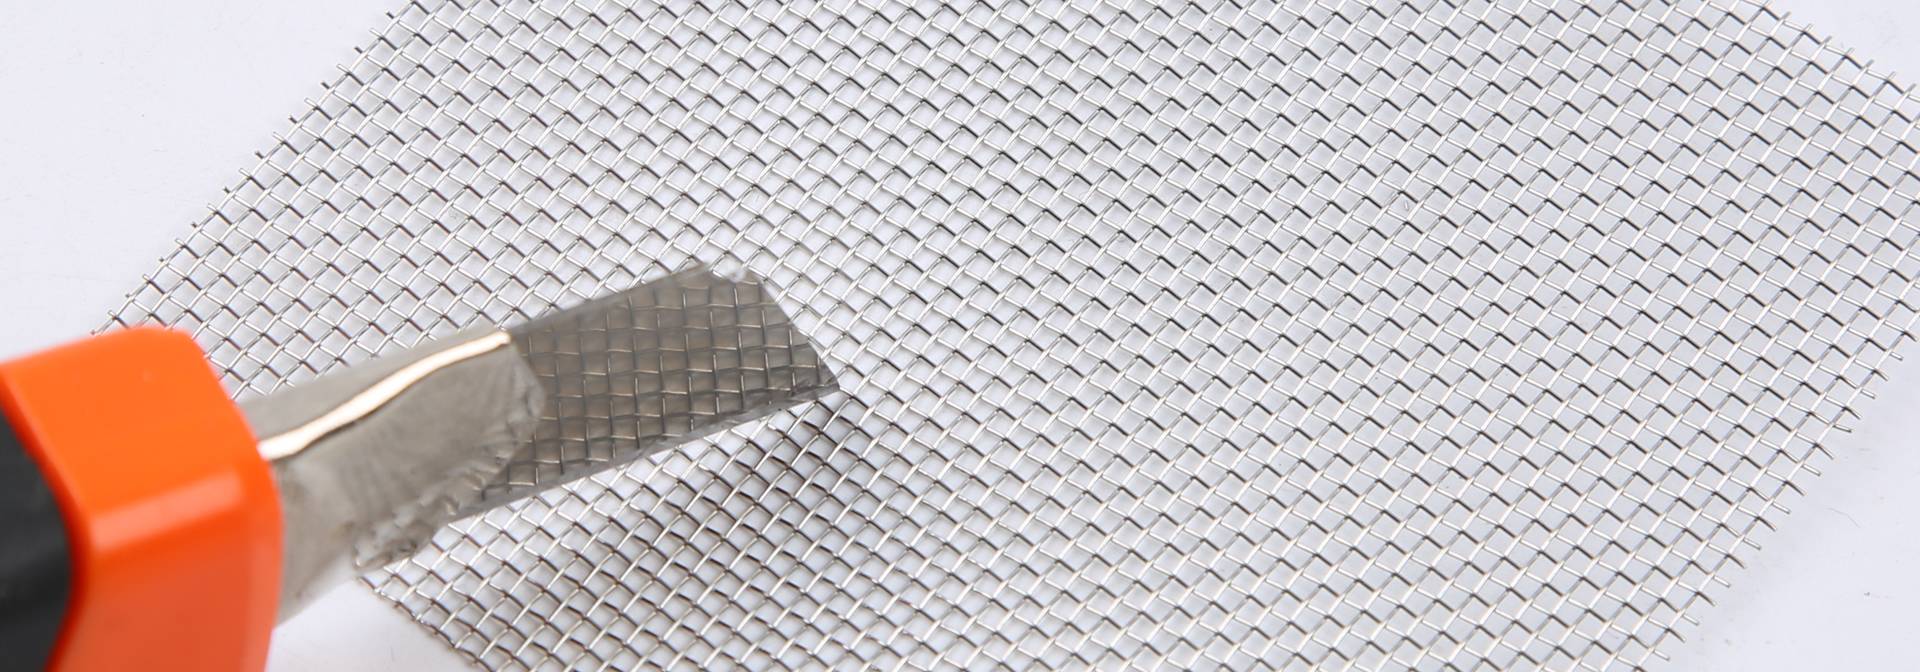 Stainless Steel Insect Screen for Windows & Doors